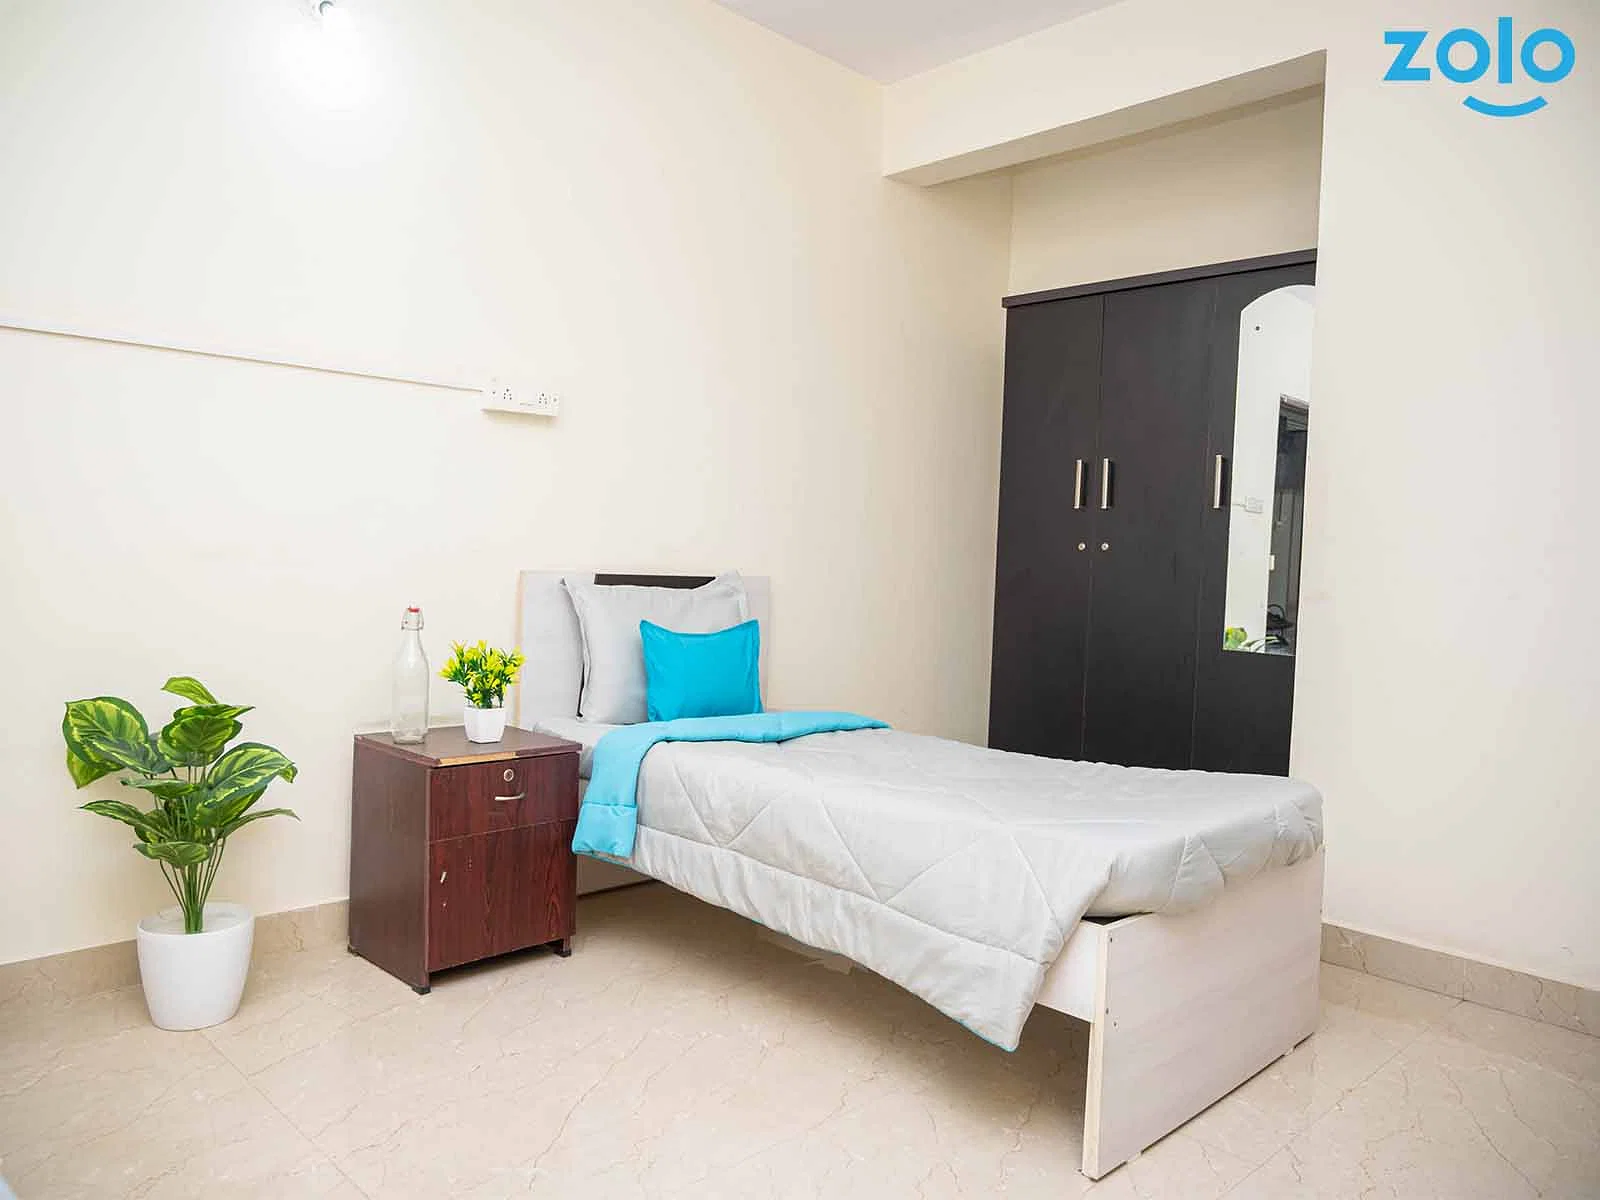 luxury PG accommodations with modern Wi-Fi, AC, and TV in Thanisandra-Bangalore-Zolo Clapton